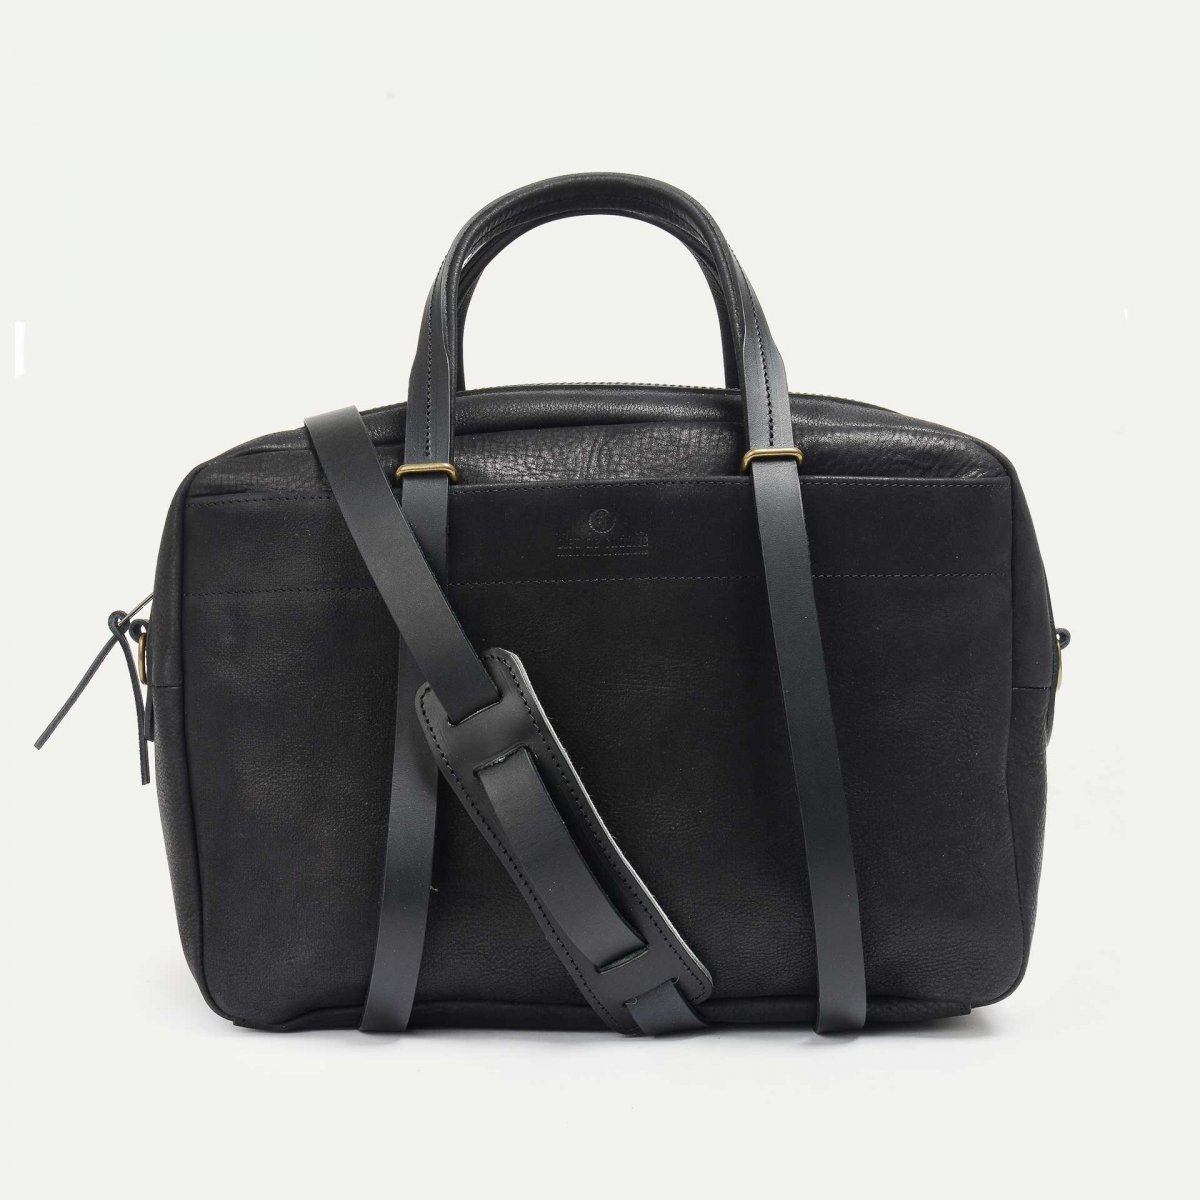 Report Business bag - Charcoal black / Waxed Leather (image n°2)